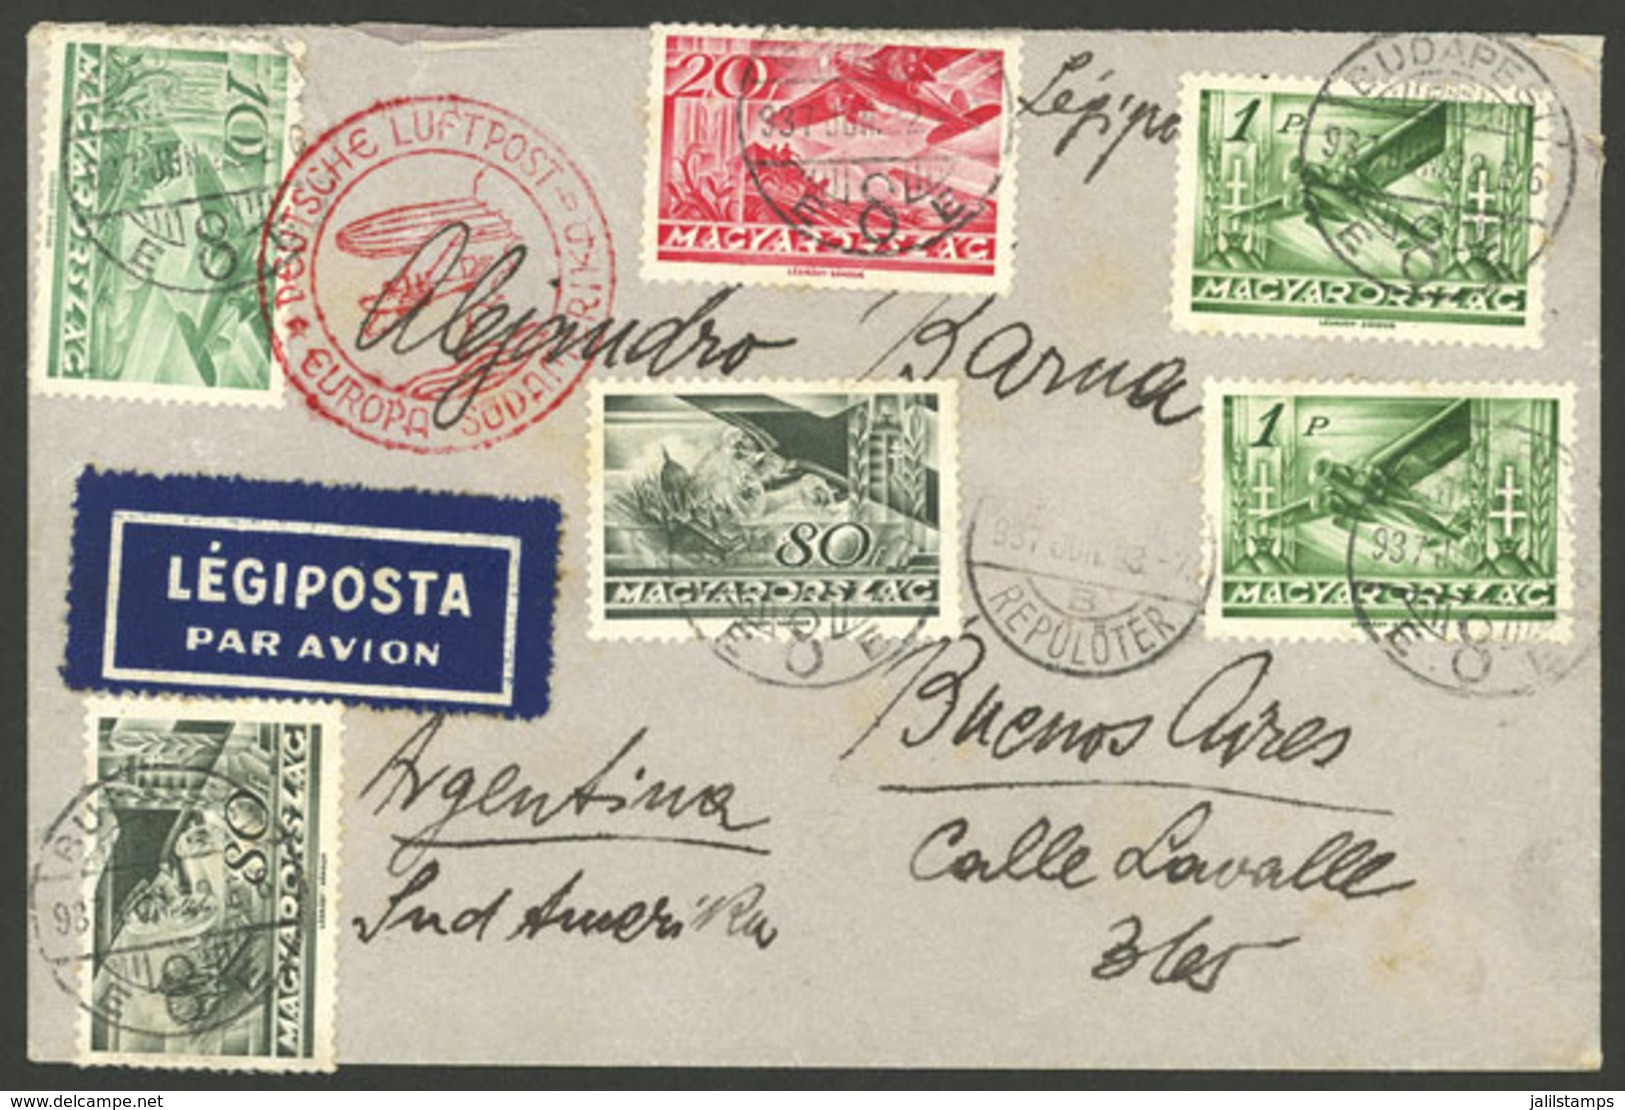 HUNGARY: 22/JUN/1937 Budapest - Argentina, Airmail Cover Flown By German DLH Franked With 3.90P., Buenos Aires Arrival B - Briefe U. Dokumente